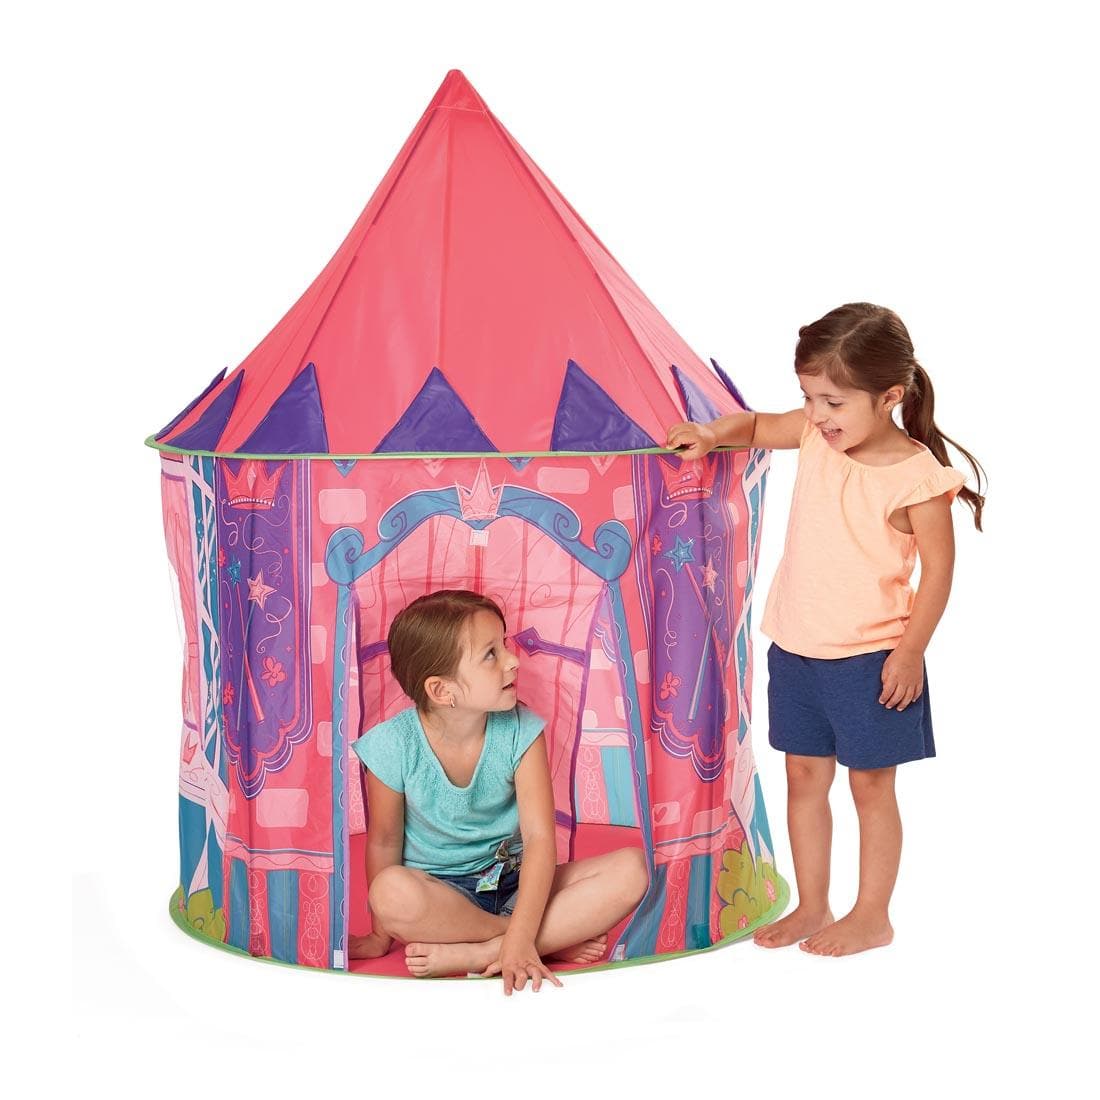 Epoch Everlasting Play-Kidoozie Royal Castle Playhouse Kidoozie-G02532-Legacy Toys